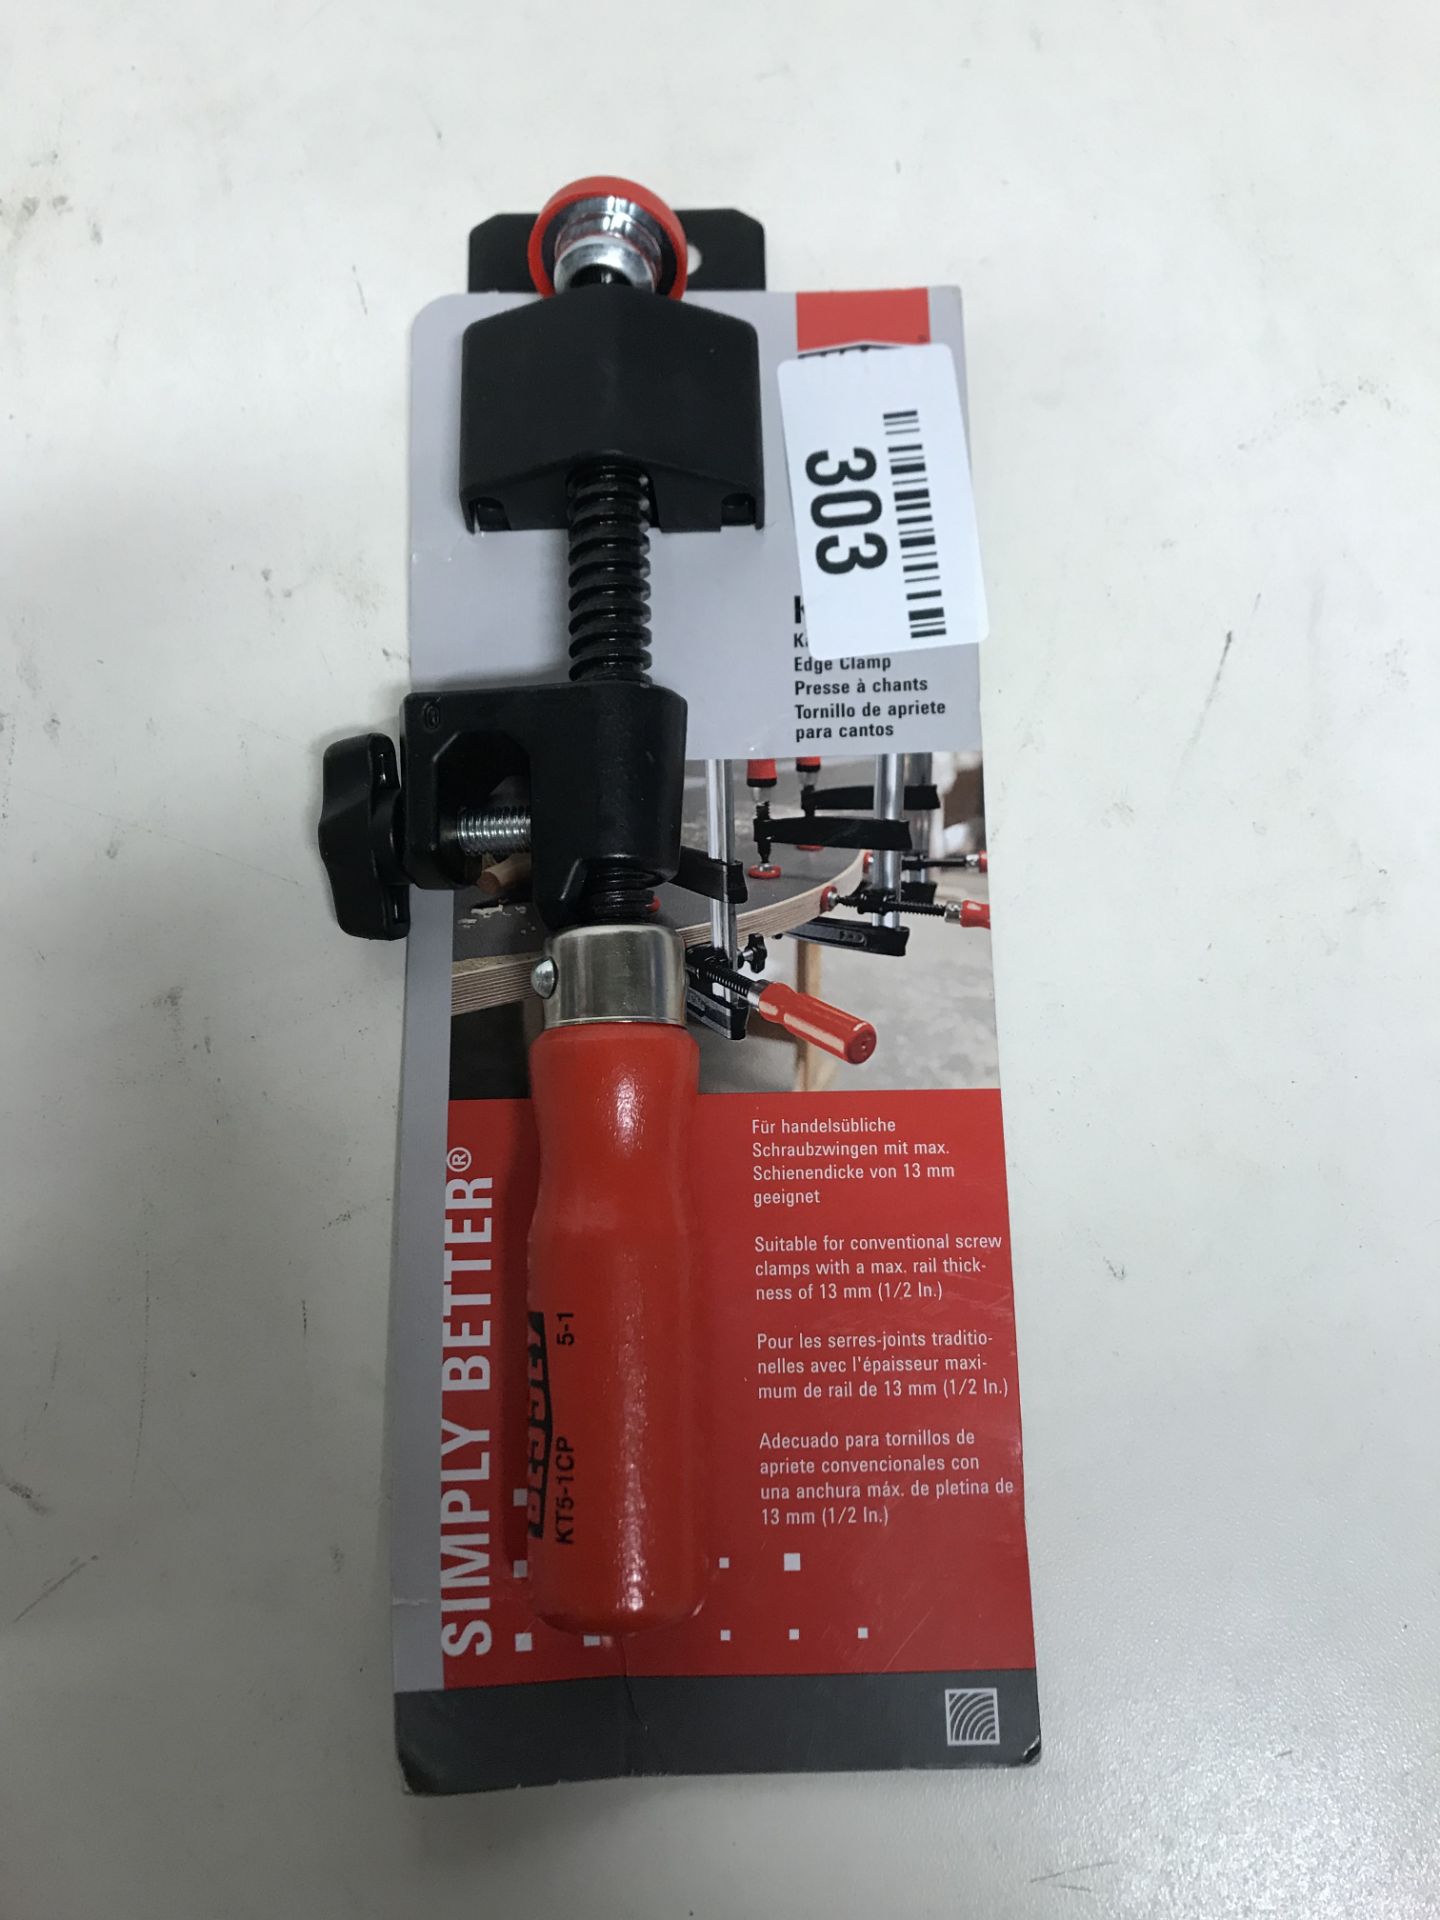 1 x Bessey WBEKT5 Edge clamp KT5, Red/Black, 1 | EAN: 4008158026176 | RRP £14 - Image 2 of 2